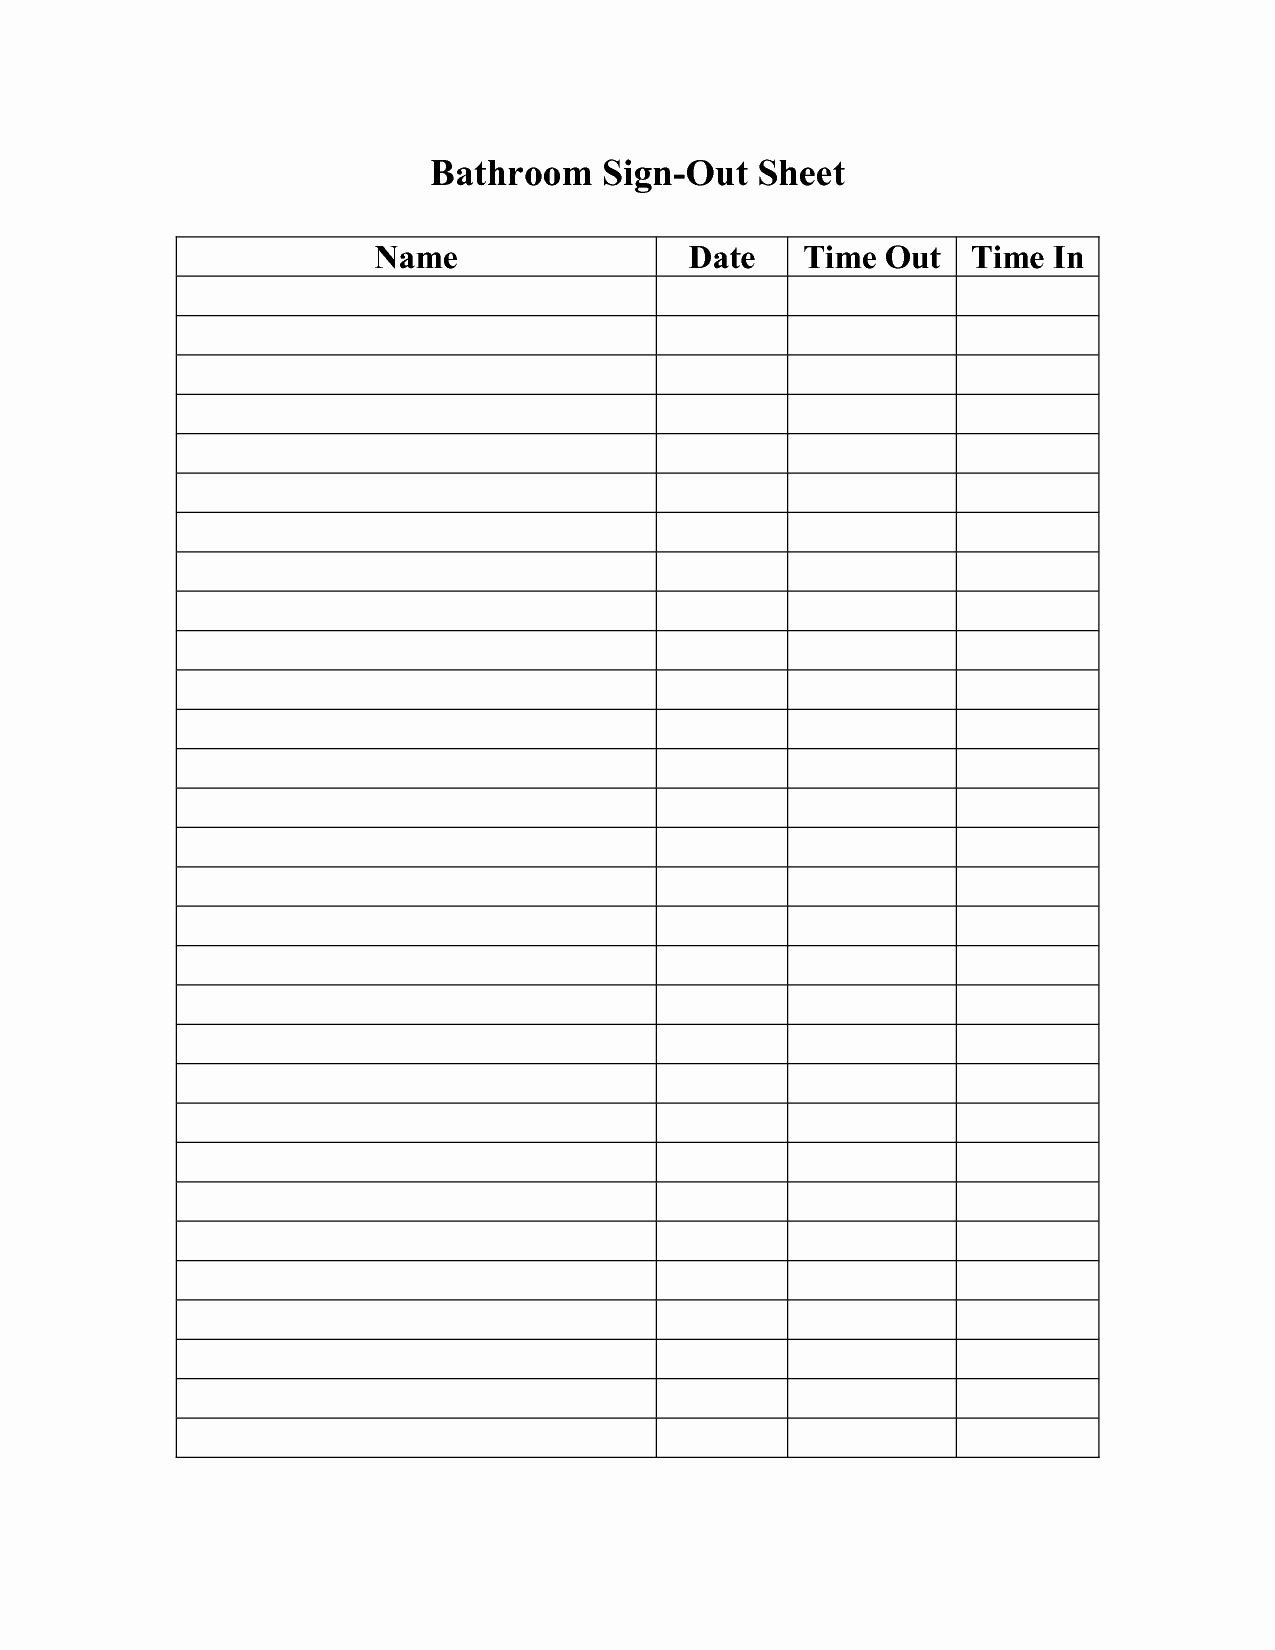 Signing In and Out Template Unique Bathroom Sign Out Sheet Template